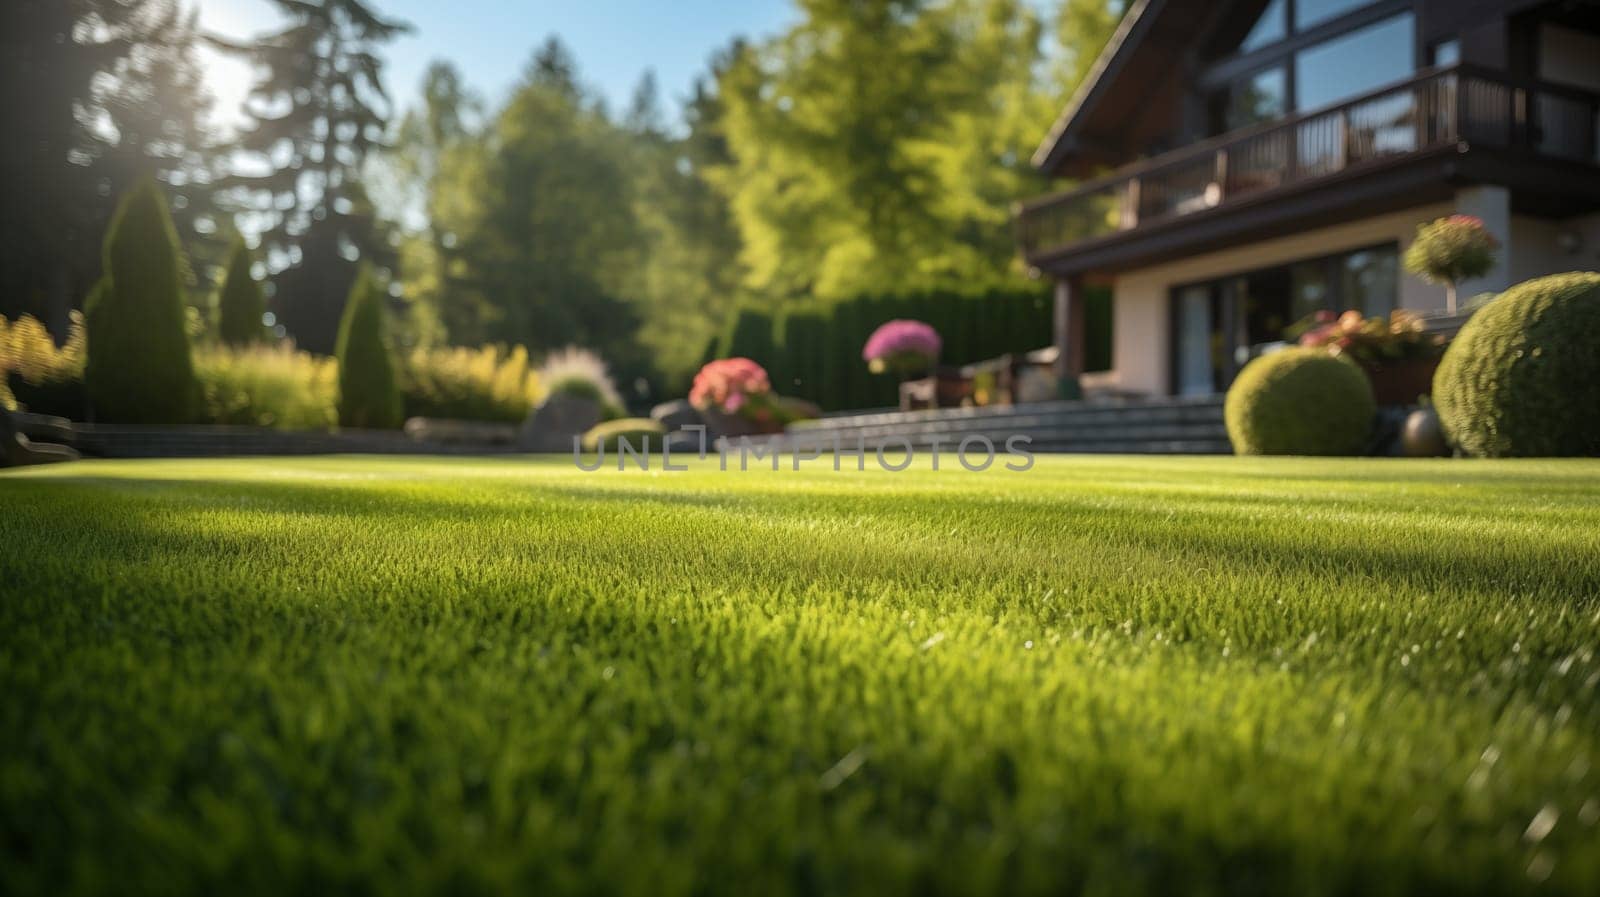 The last rays of sunlight cast a warm glow on a perfectly manicured lawn leading up to a luxurious house with decorative topiary and flowering plants.